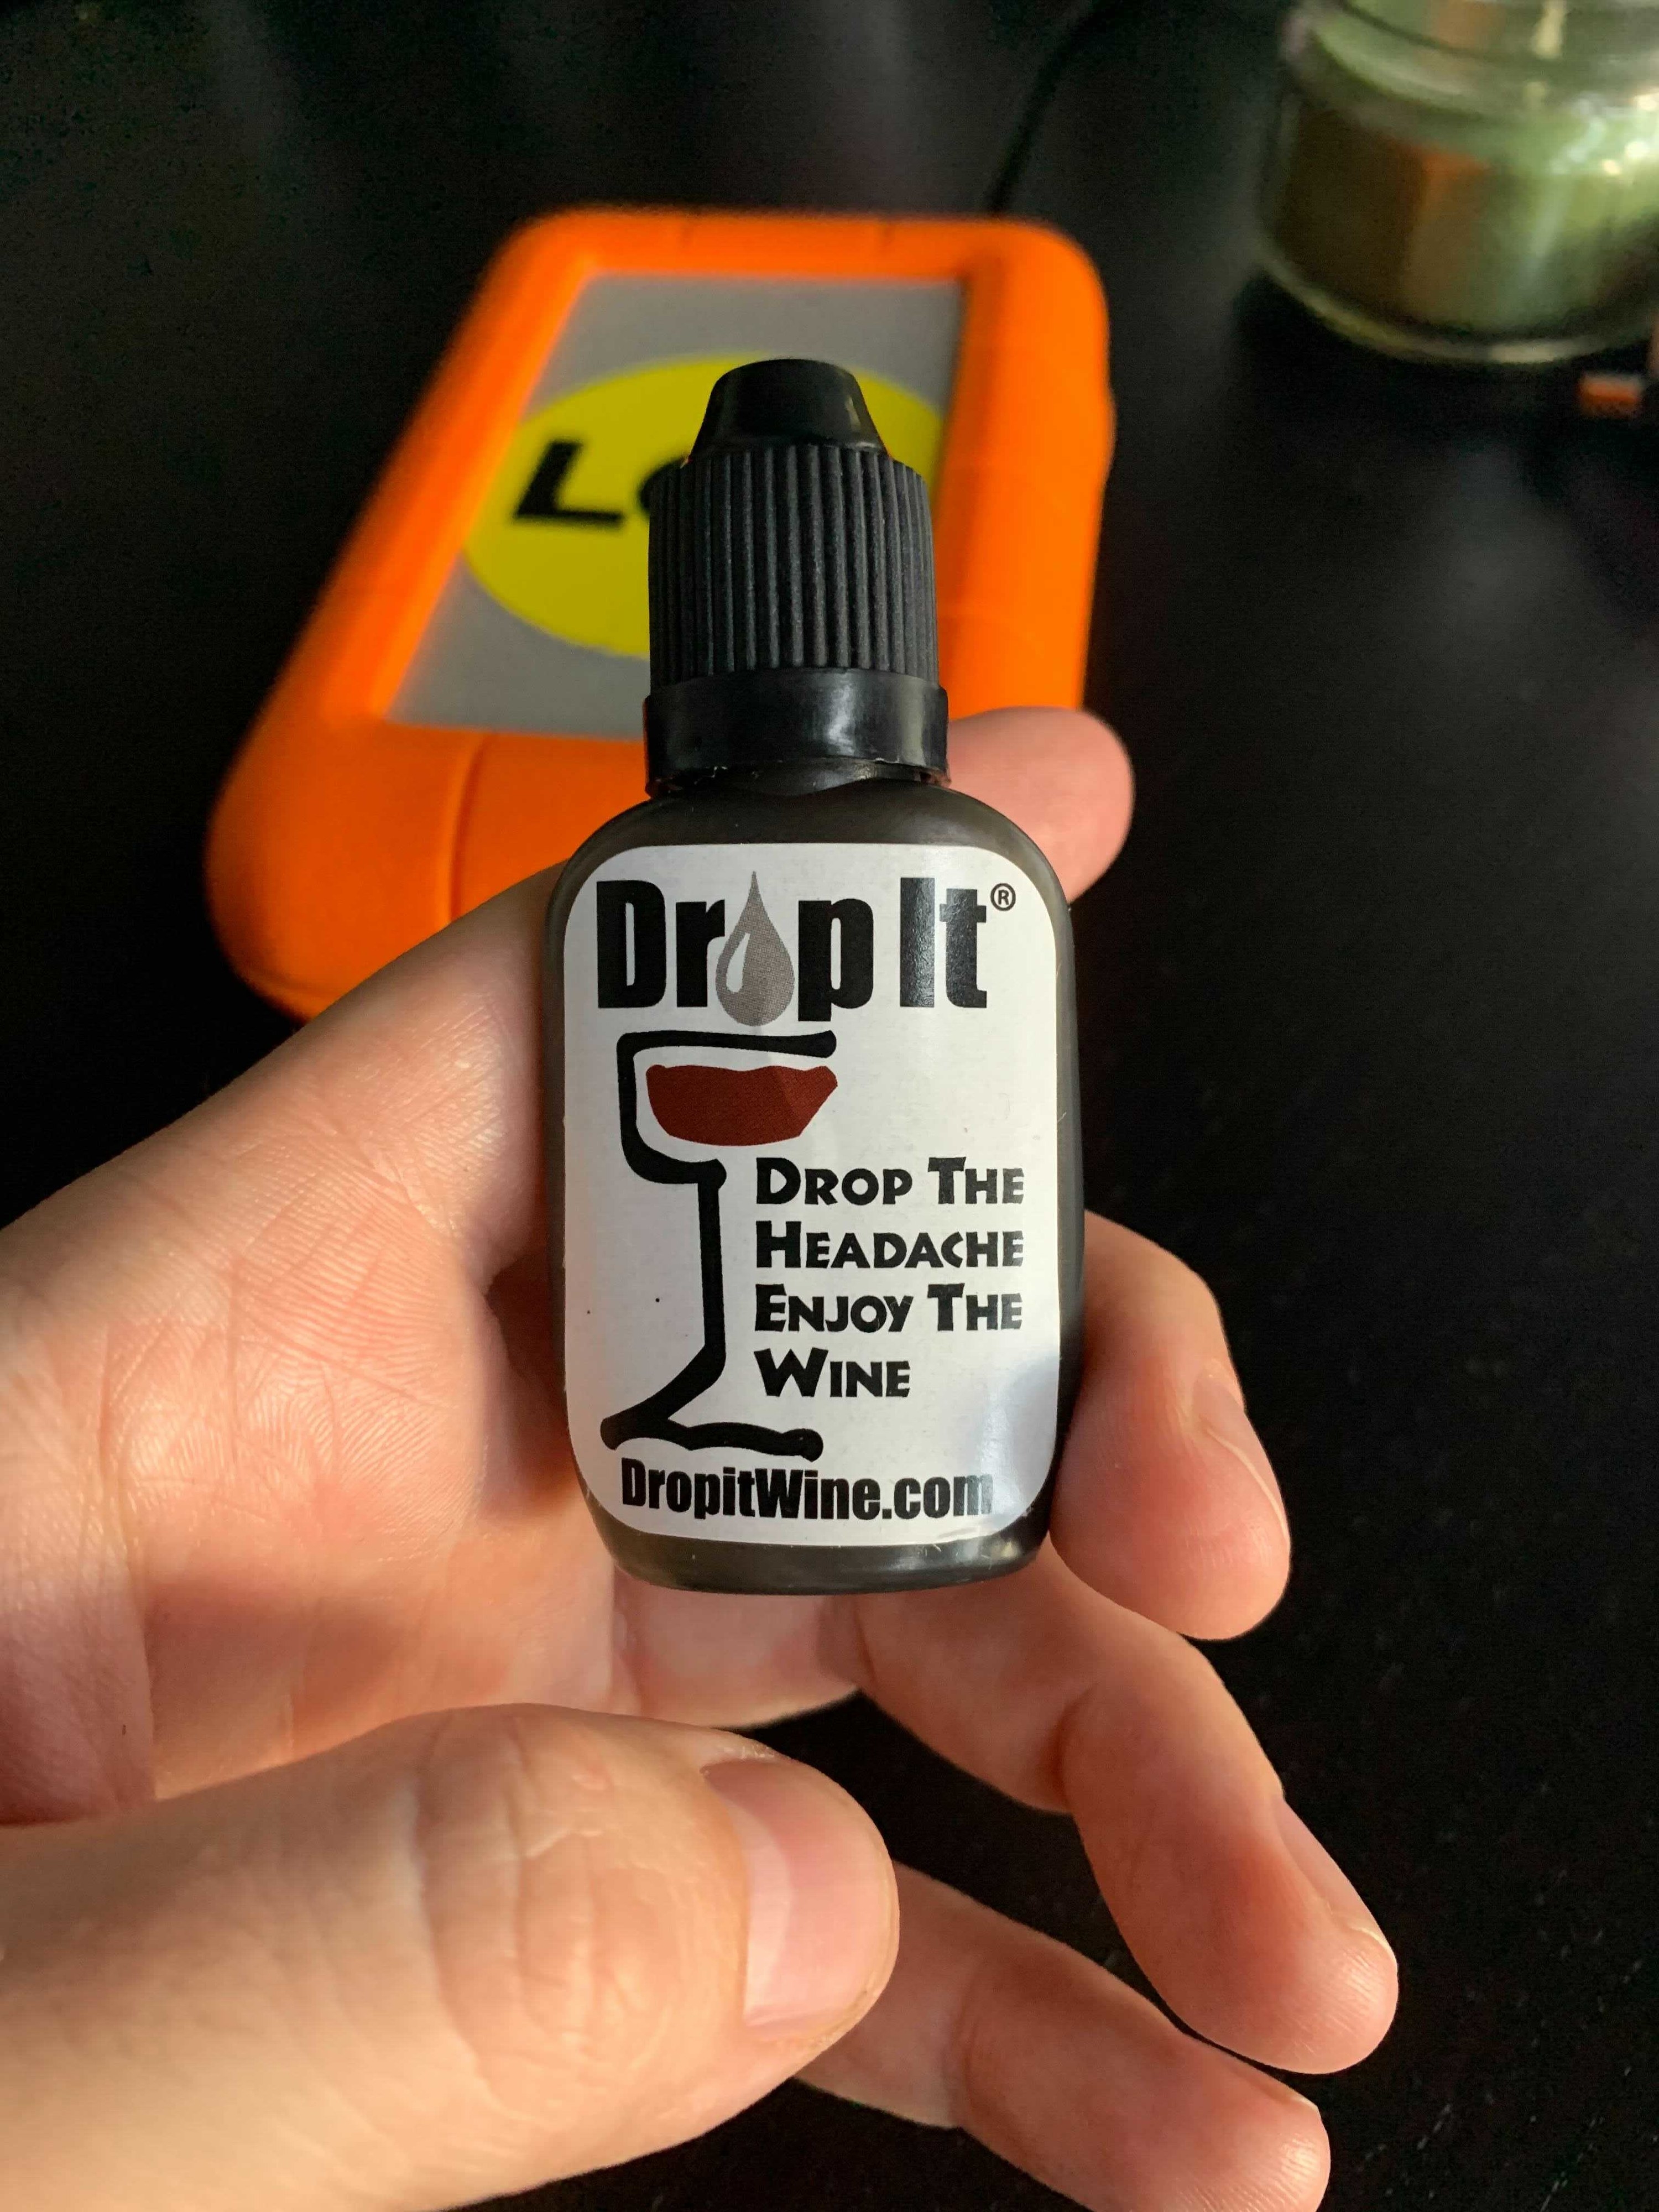 A bottle of Drop it in a hand  against a dark background